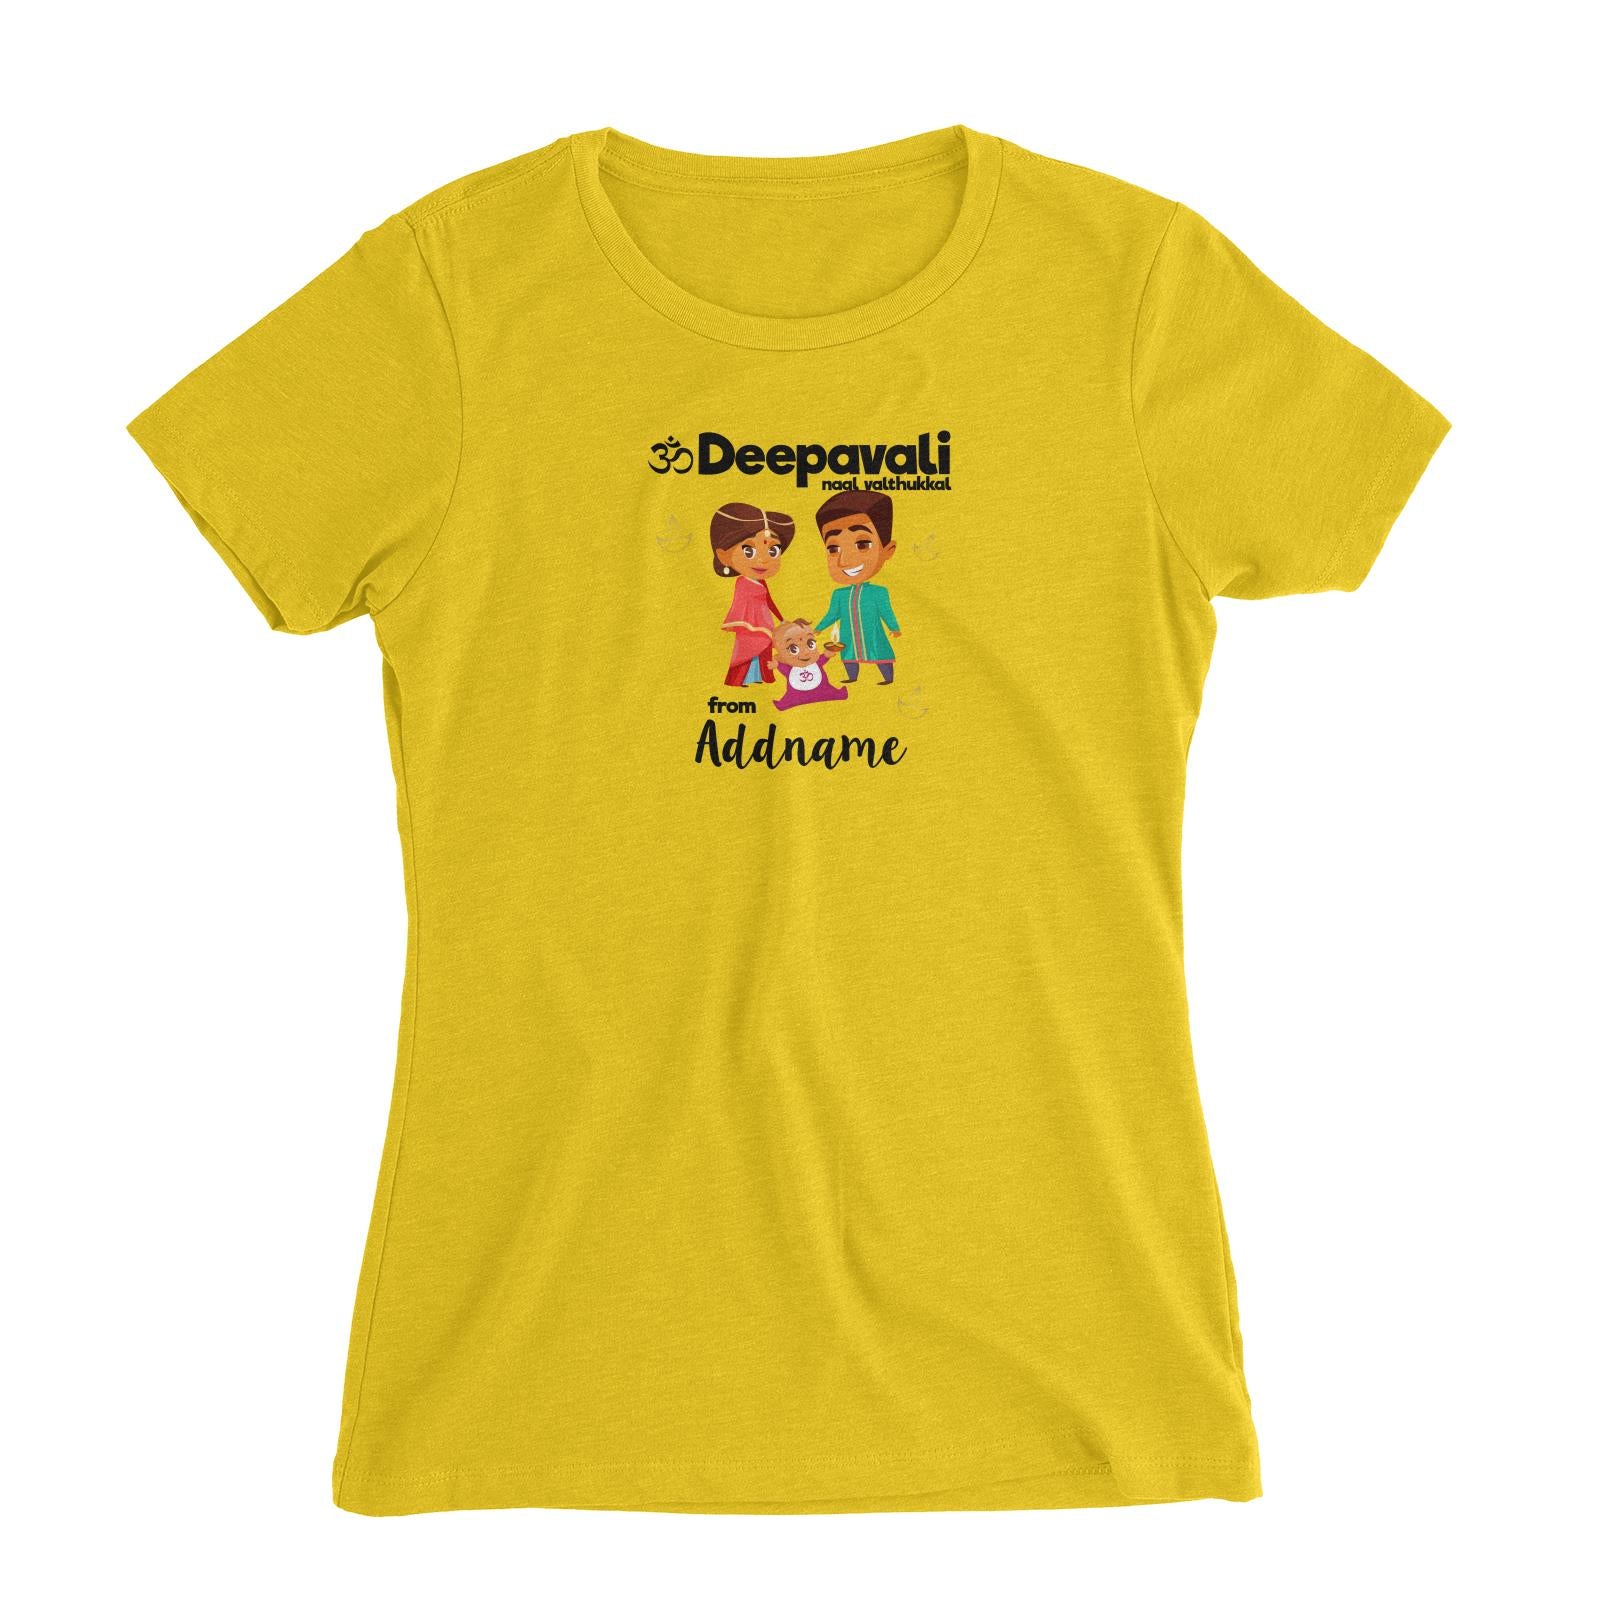 Cute Family Of Three OM Deepavali From Addname Women's Slim Fit T-Shirt